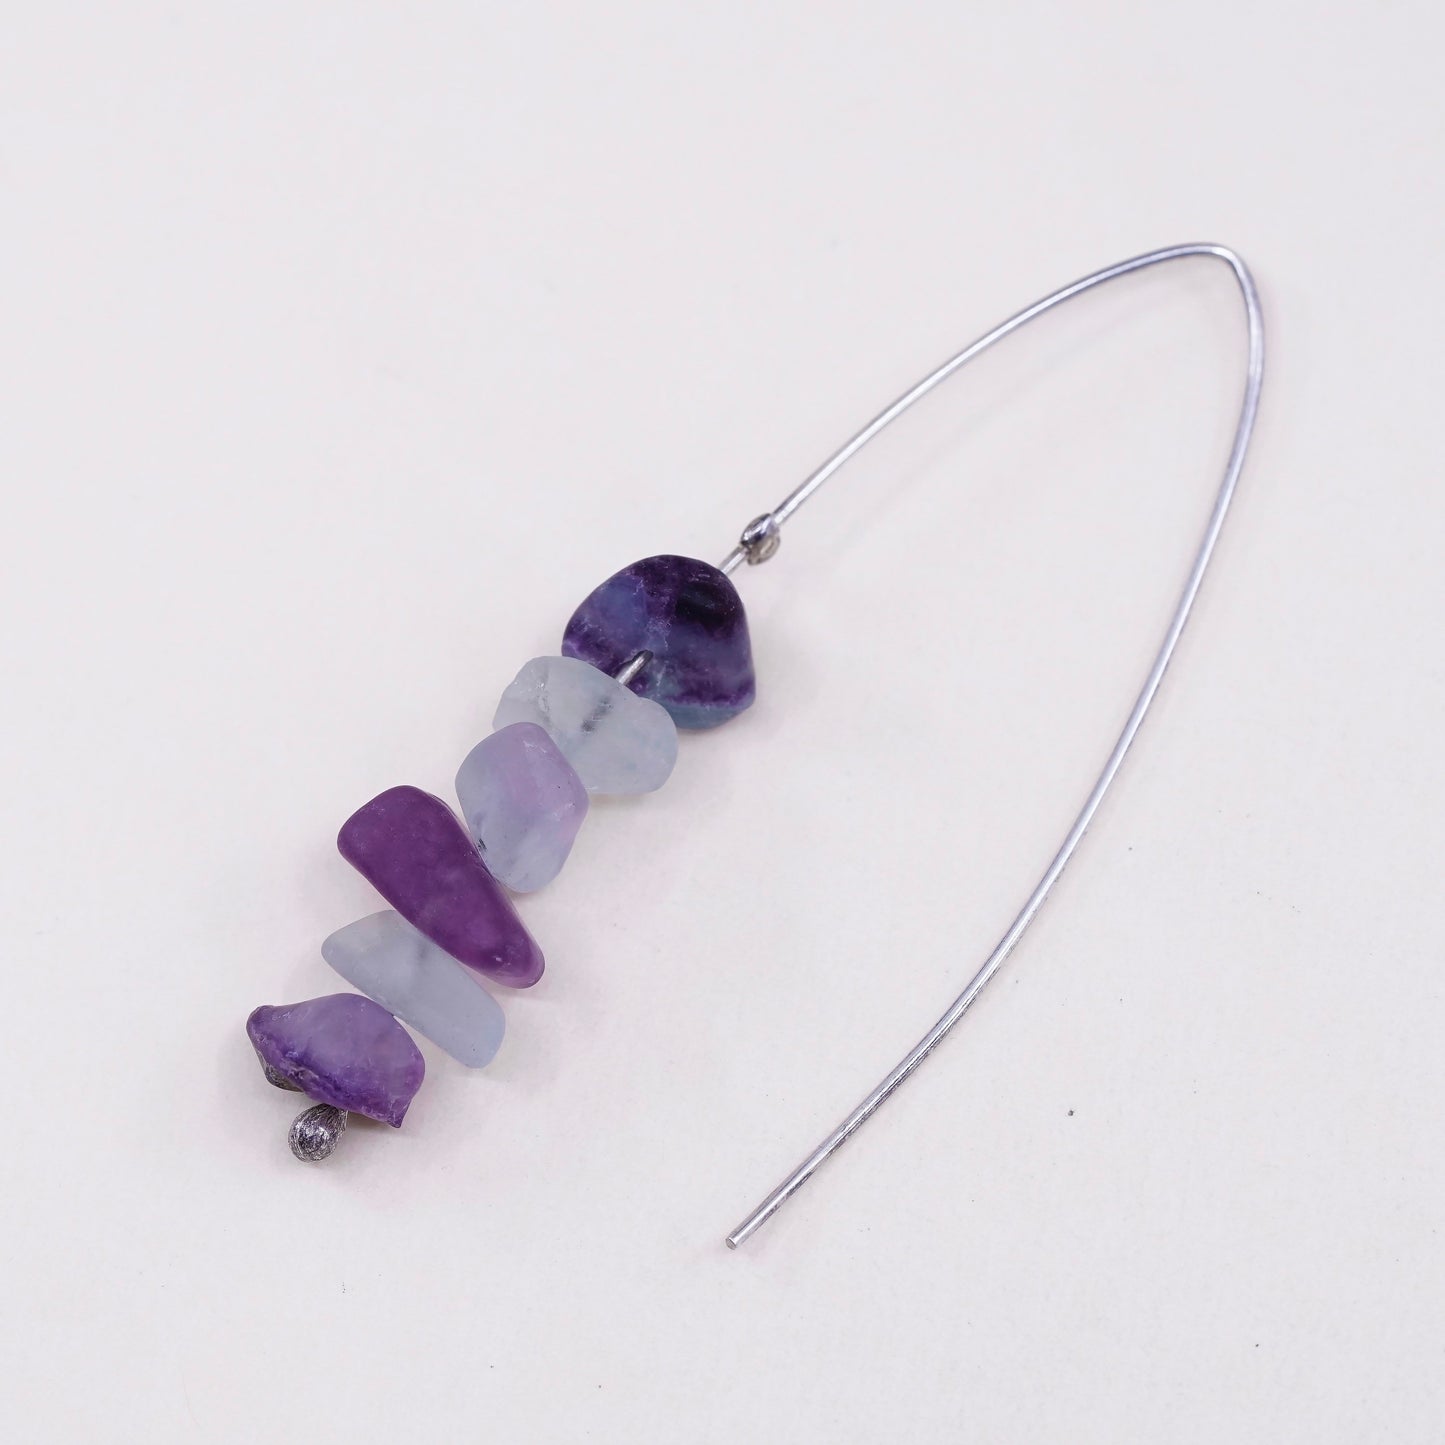 VTG Sterling 925 silver handmade earrings with amethyst and fluorite nuggets